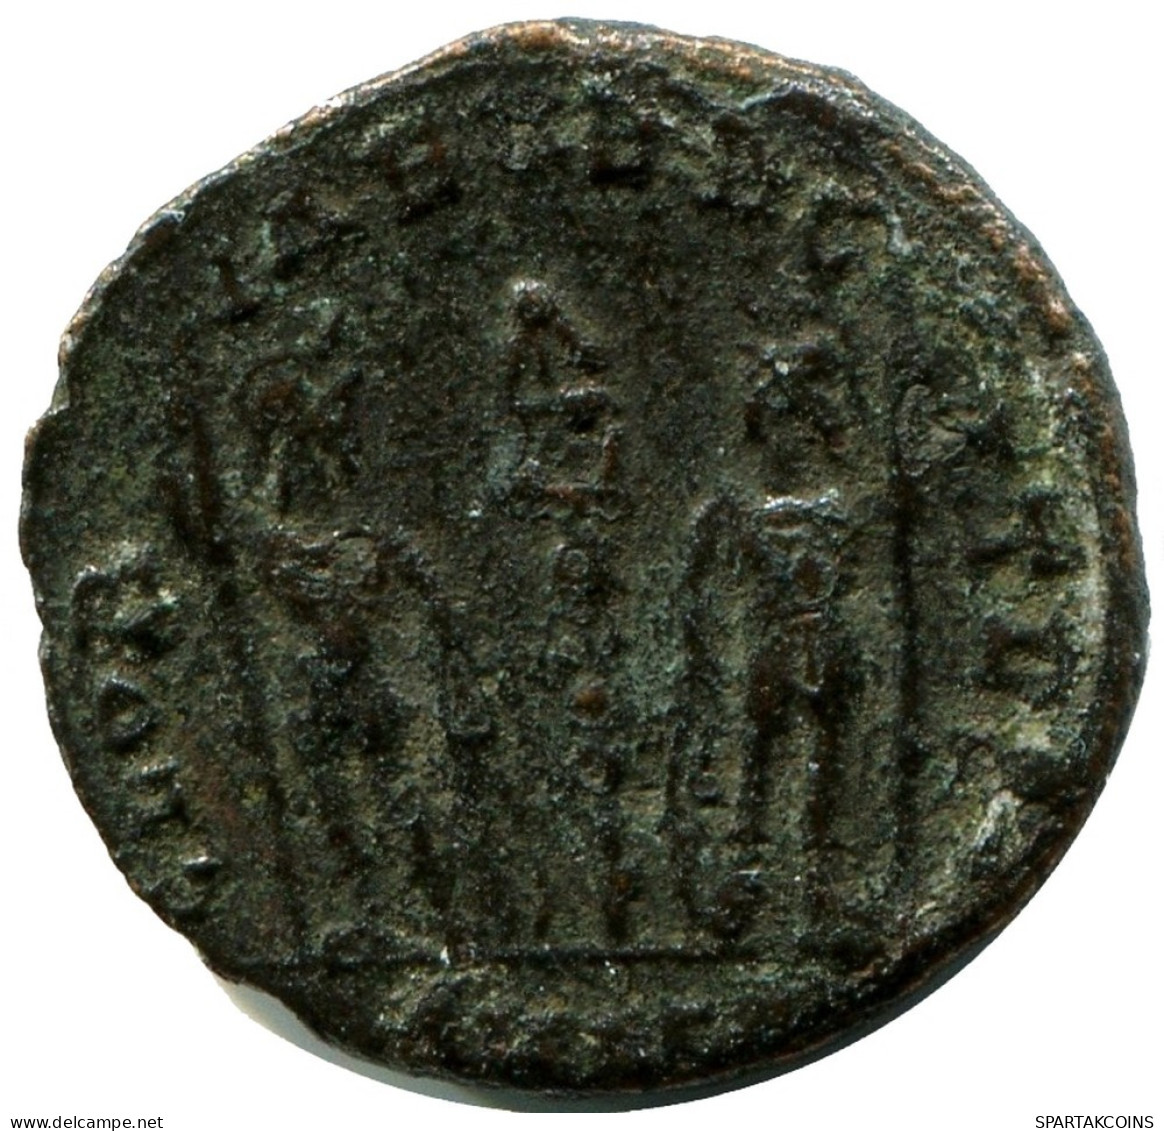 CONSTANS MINTED IN ALEKSANDRIA FROM THE ROYAL ONTARIO MUSEUM #ANC11401.14.F.A - The Christian Empire (307 AD Tot 363 AD)